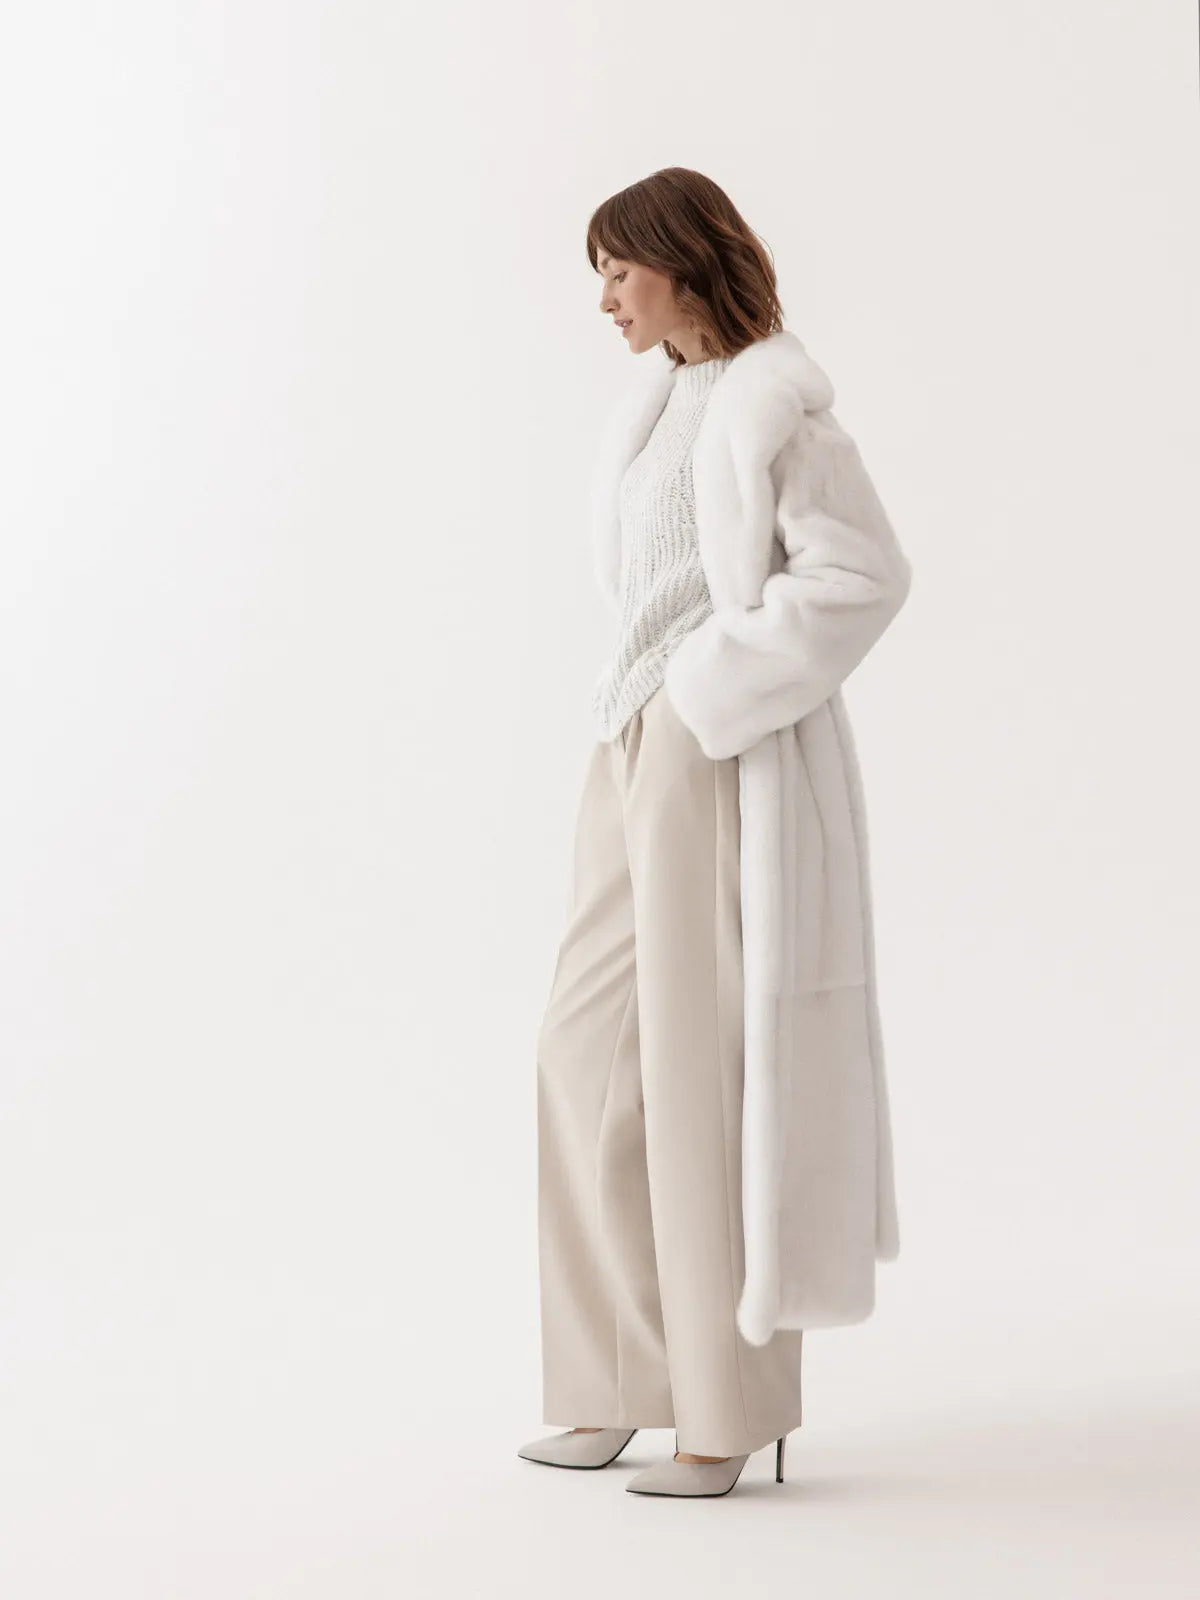 Mink fur coat in an incredible off-white shade with an English collar